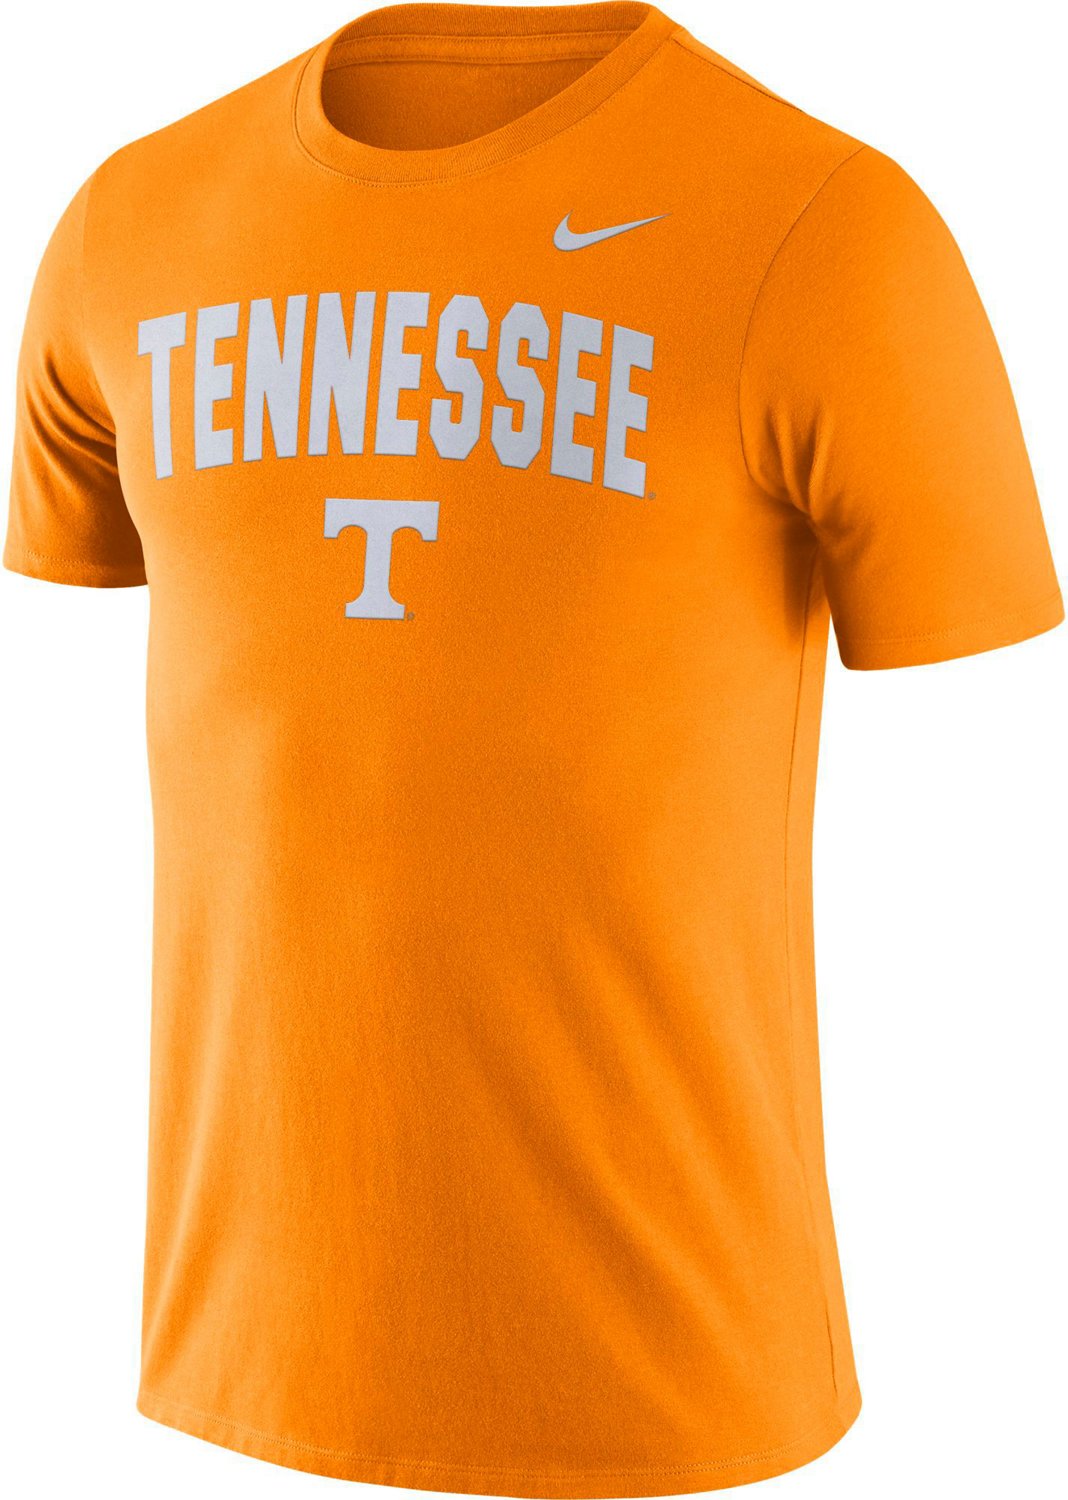 Nike Men's University of Tennessee Cotton Snow Wash Short Sleeve T ...